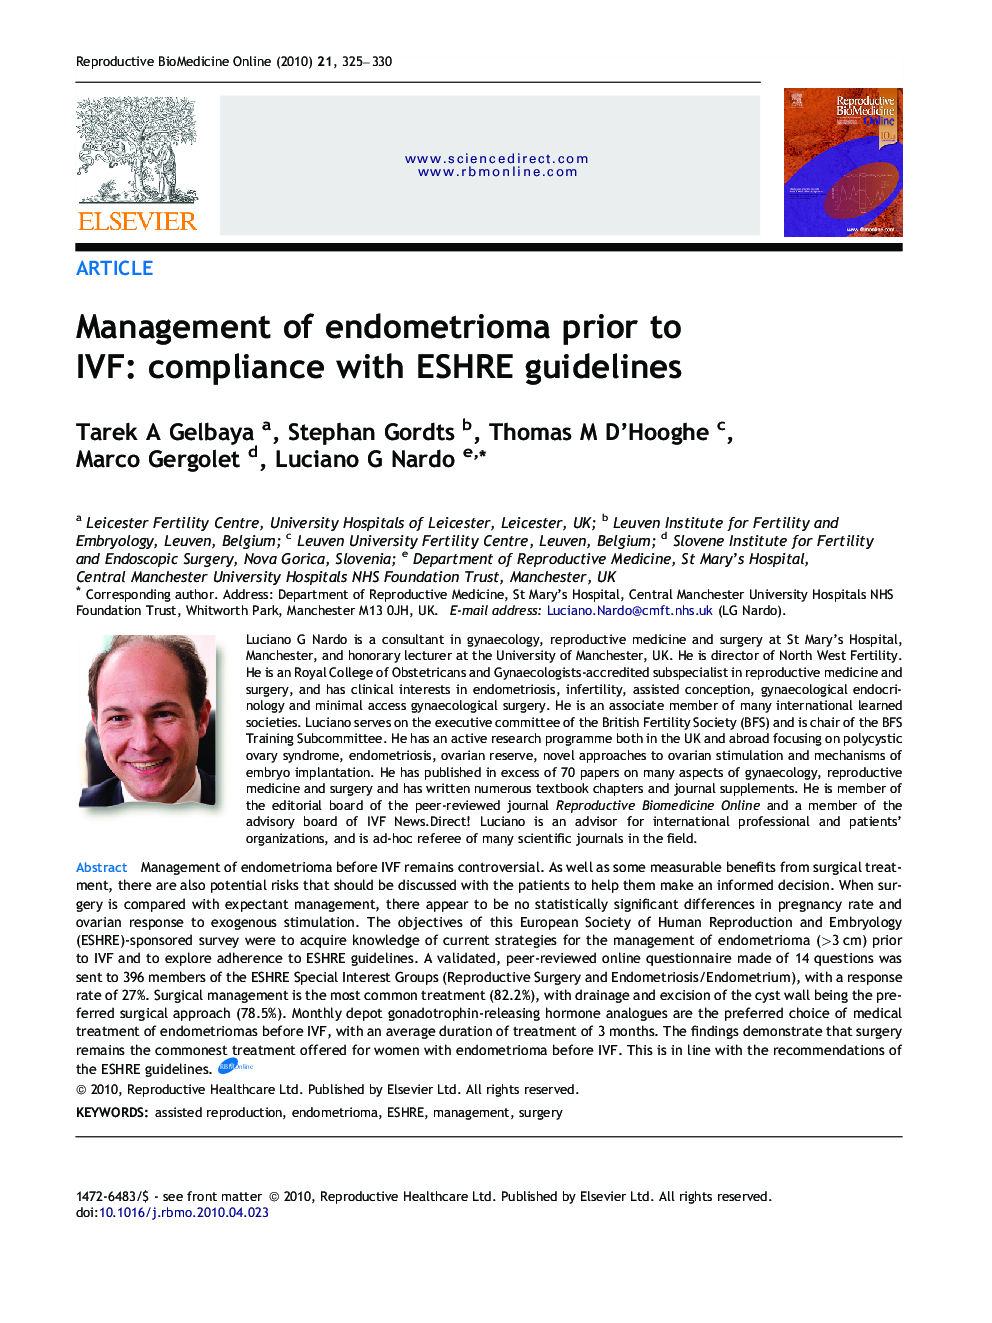 Management of endometrioma prior to IVF: compliance with ESHRE guidelines 